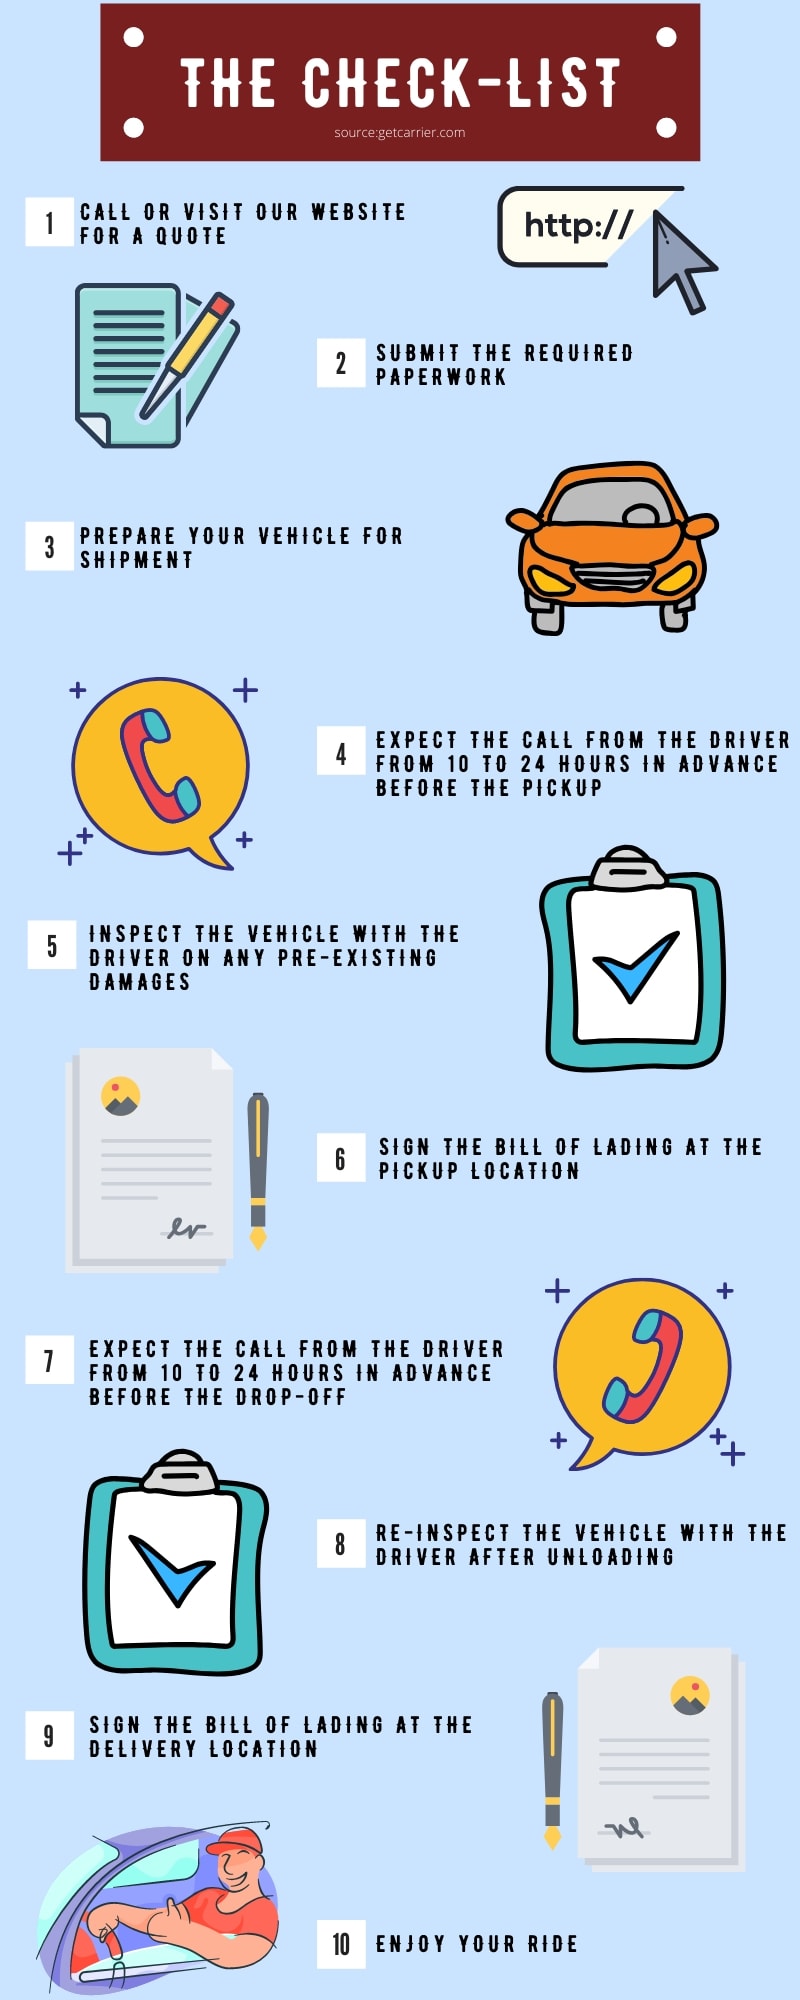 The Check-list for car shipping infographic